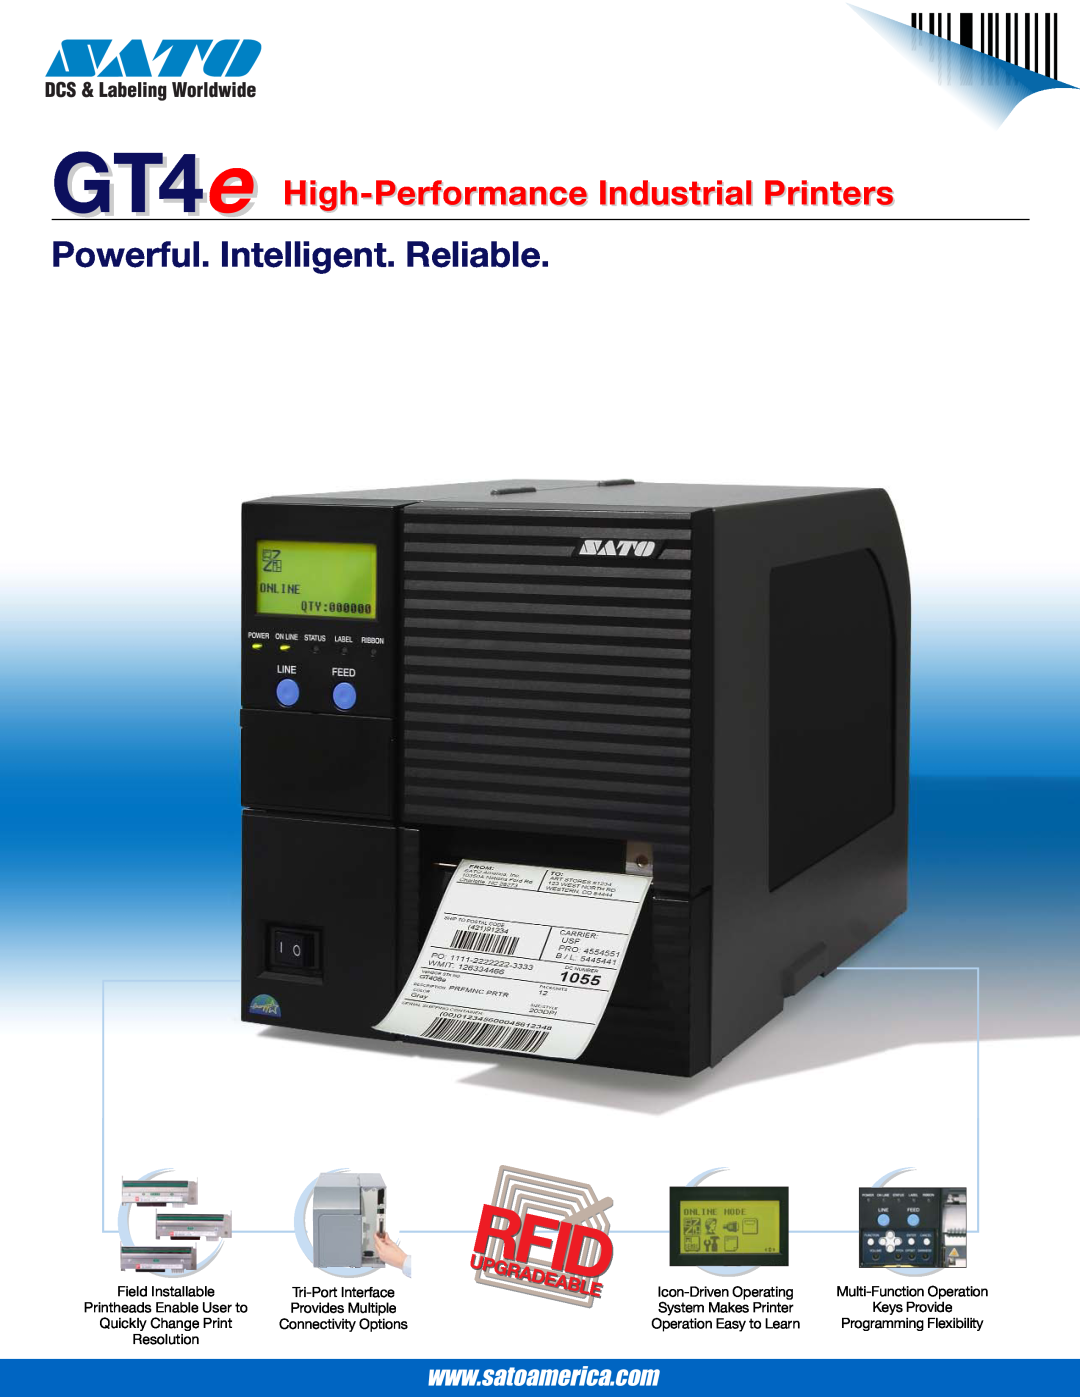 SATO manual Powerful. Intelligent. Reliable, GT4e High-Performance Industrial Printers, Multi-Function Operation 